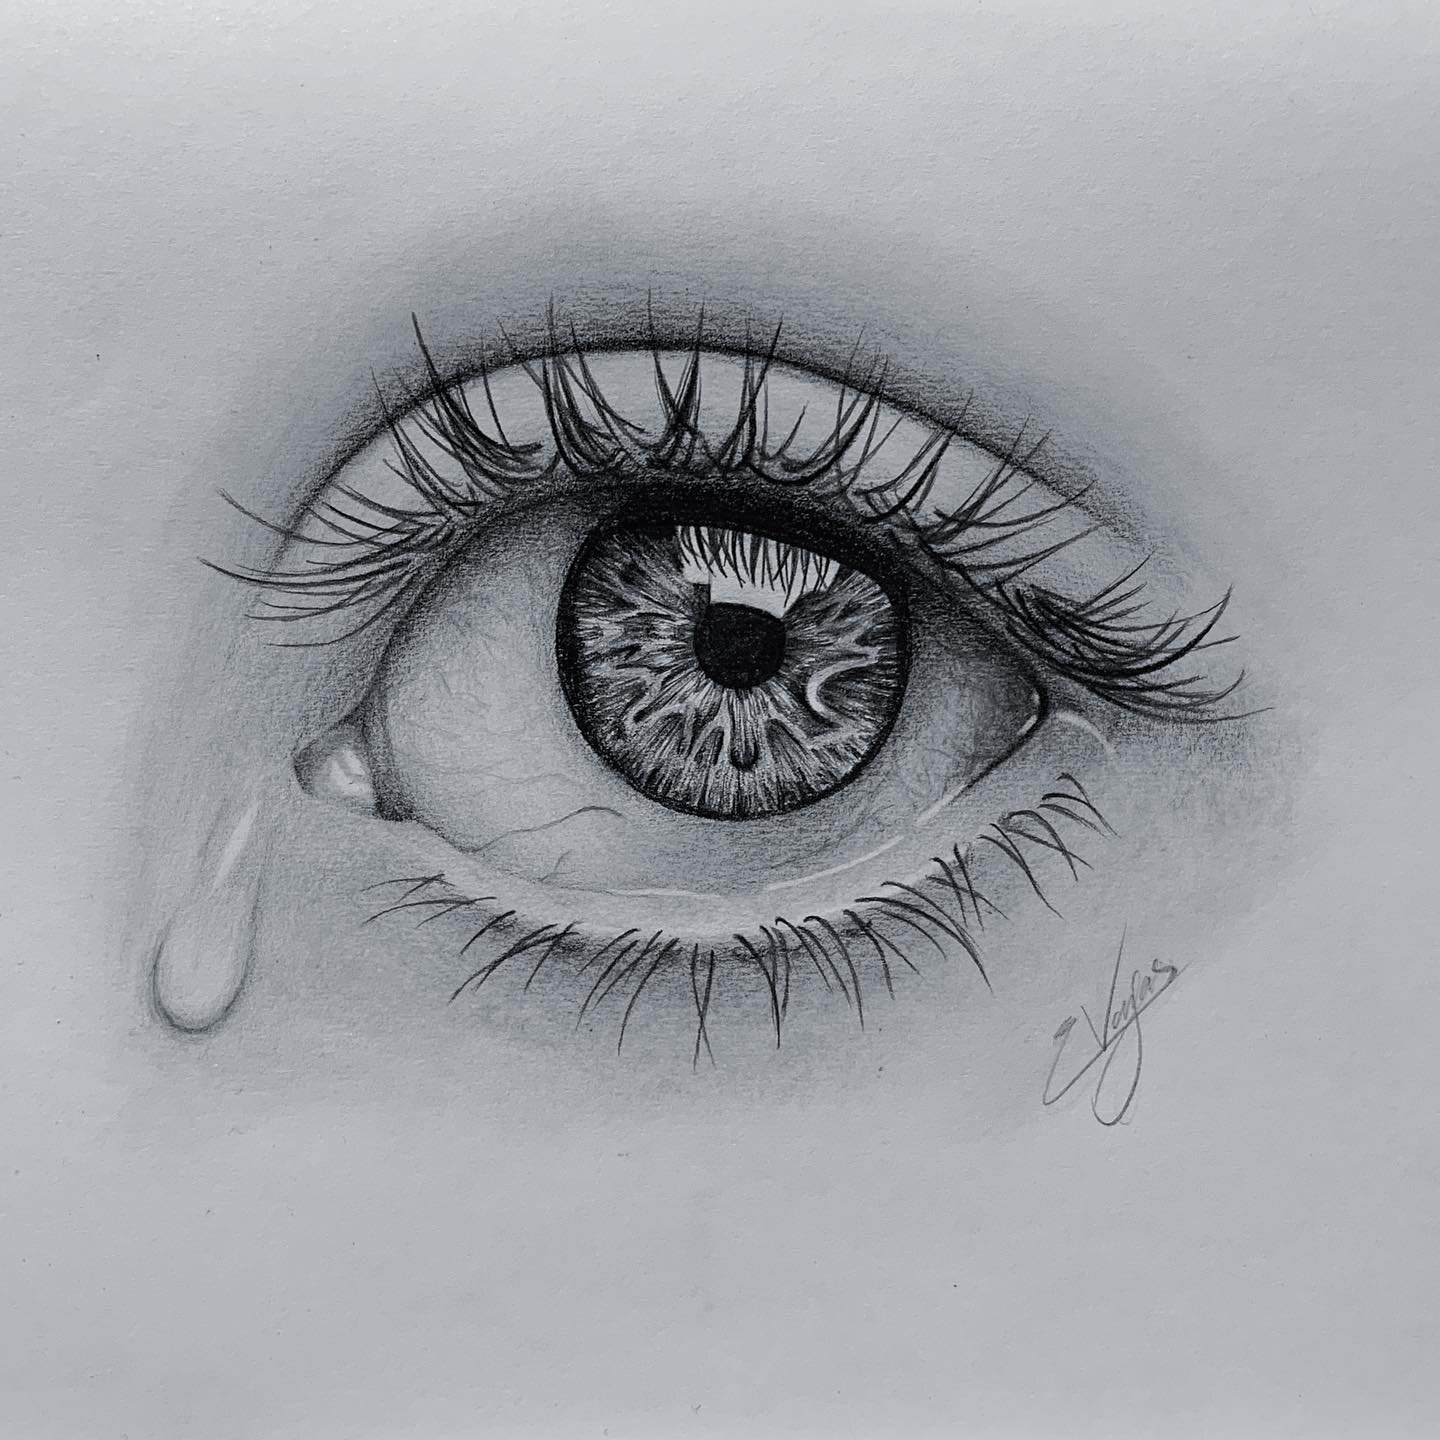 How to Draw a Realistic Eye with a Tear - YouTube